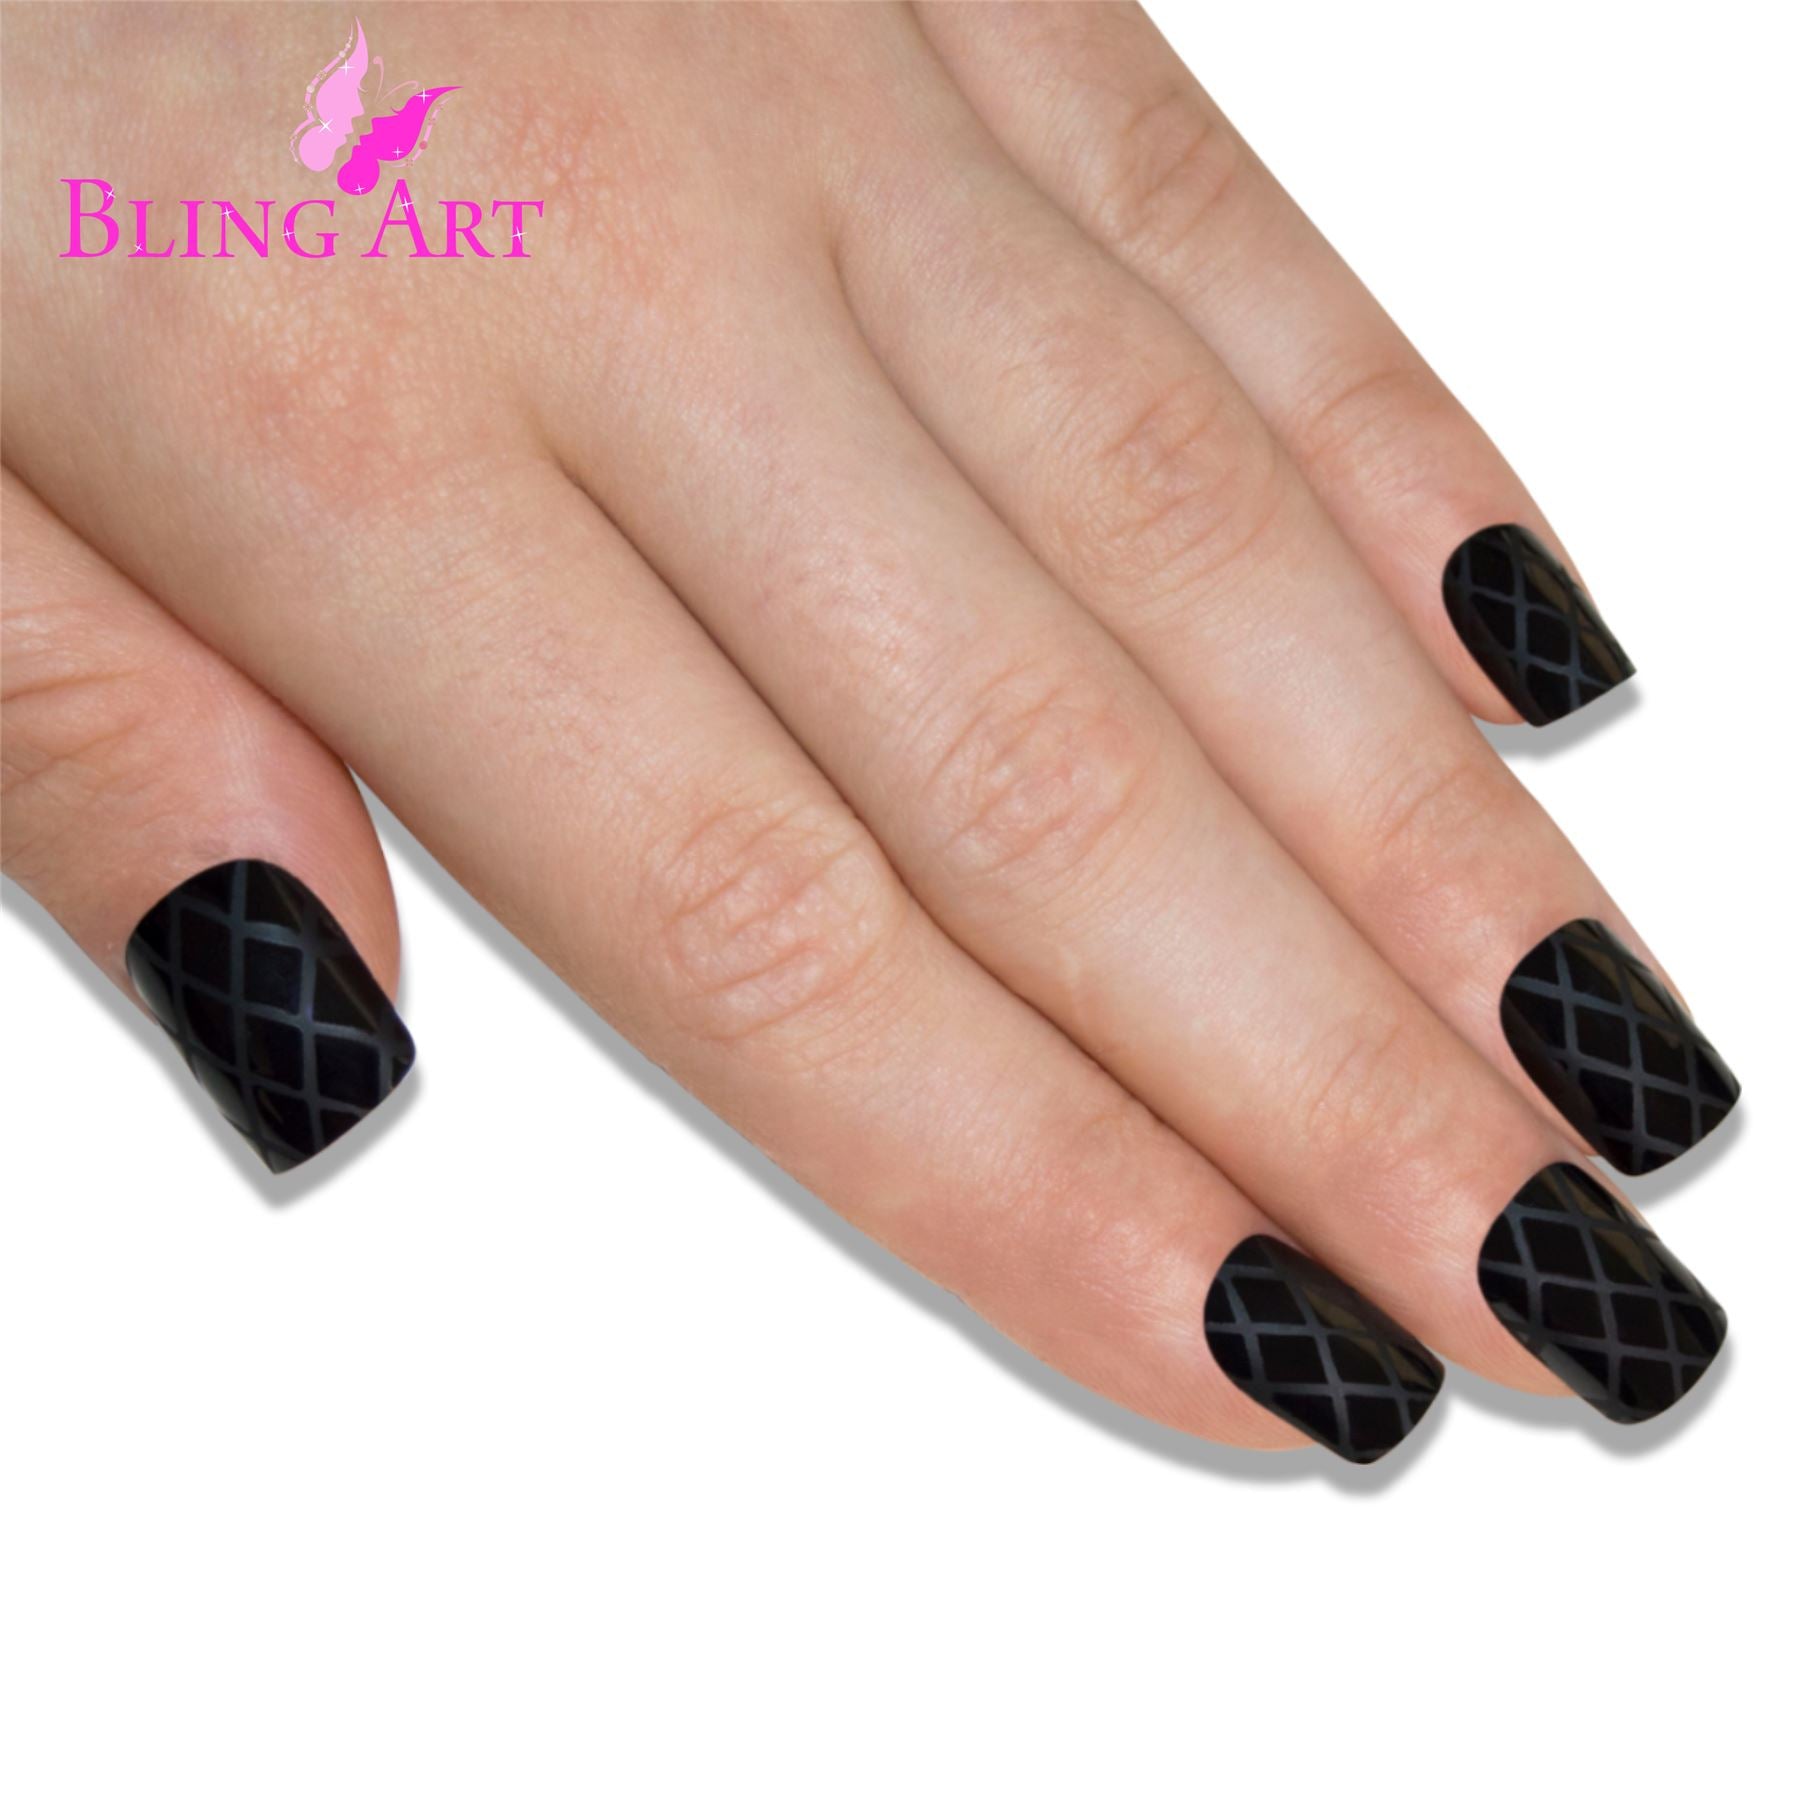 False Nails by Bling Art Matte Black French Manicure Fake Medium Tips with Glue